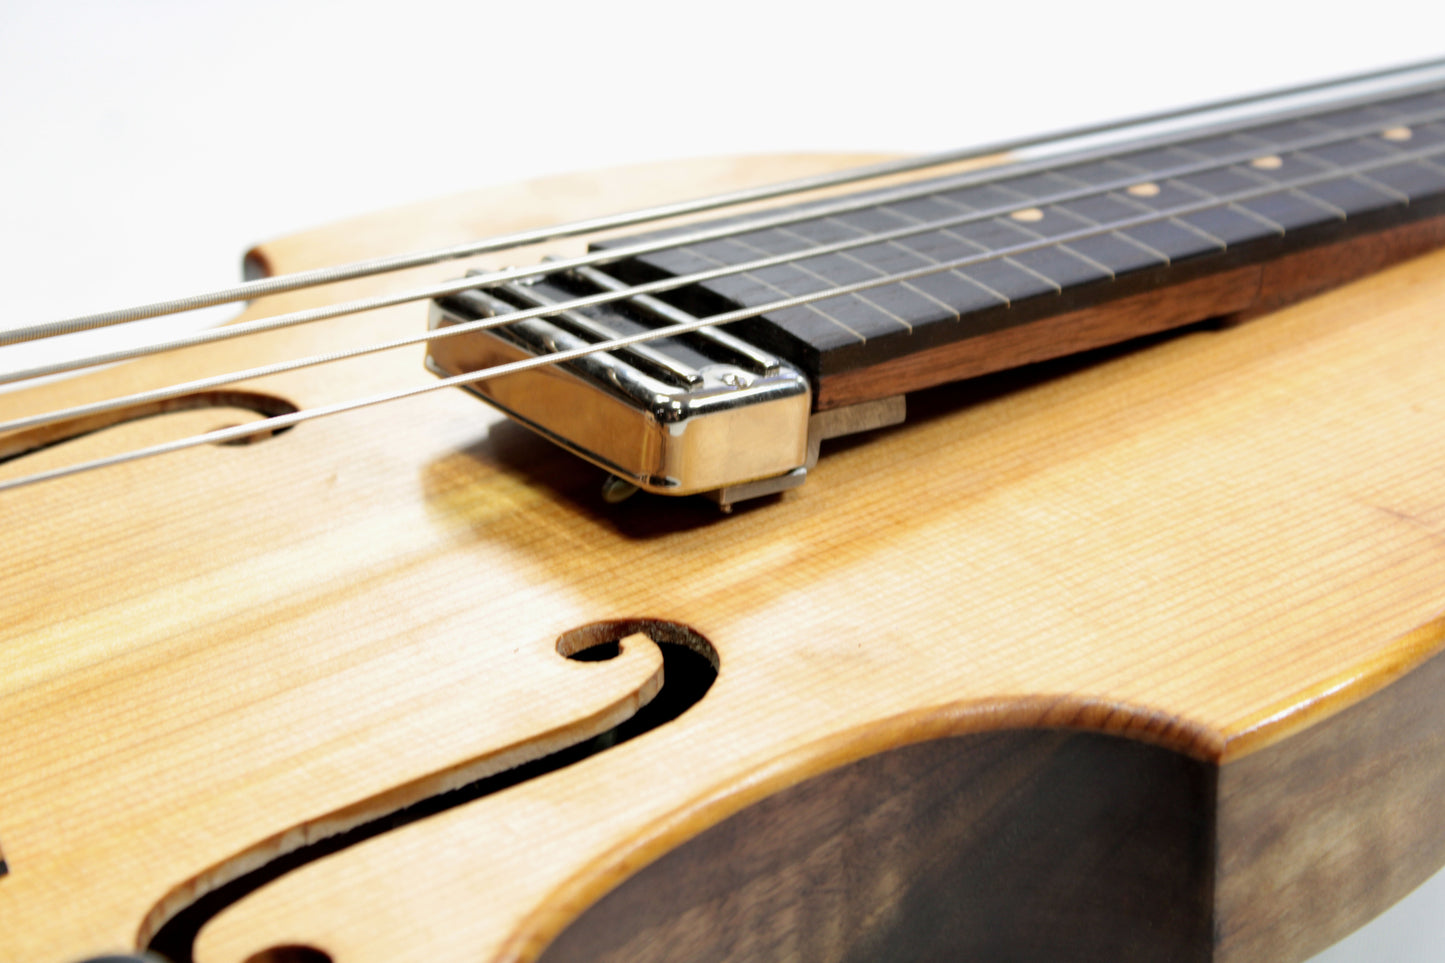 Peters Hybrid Bass, Upright tones in a E-bass package. Handmade in the USA